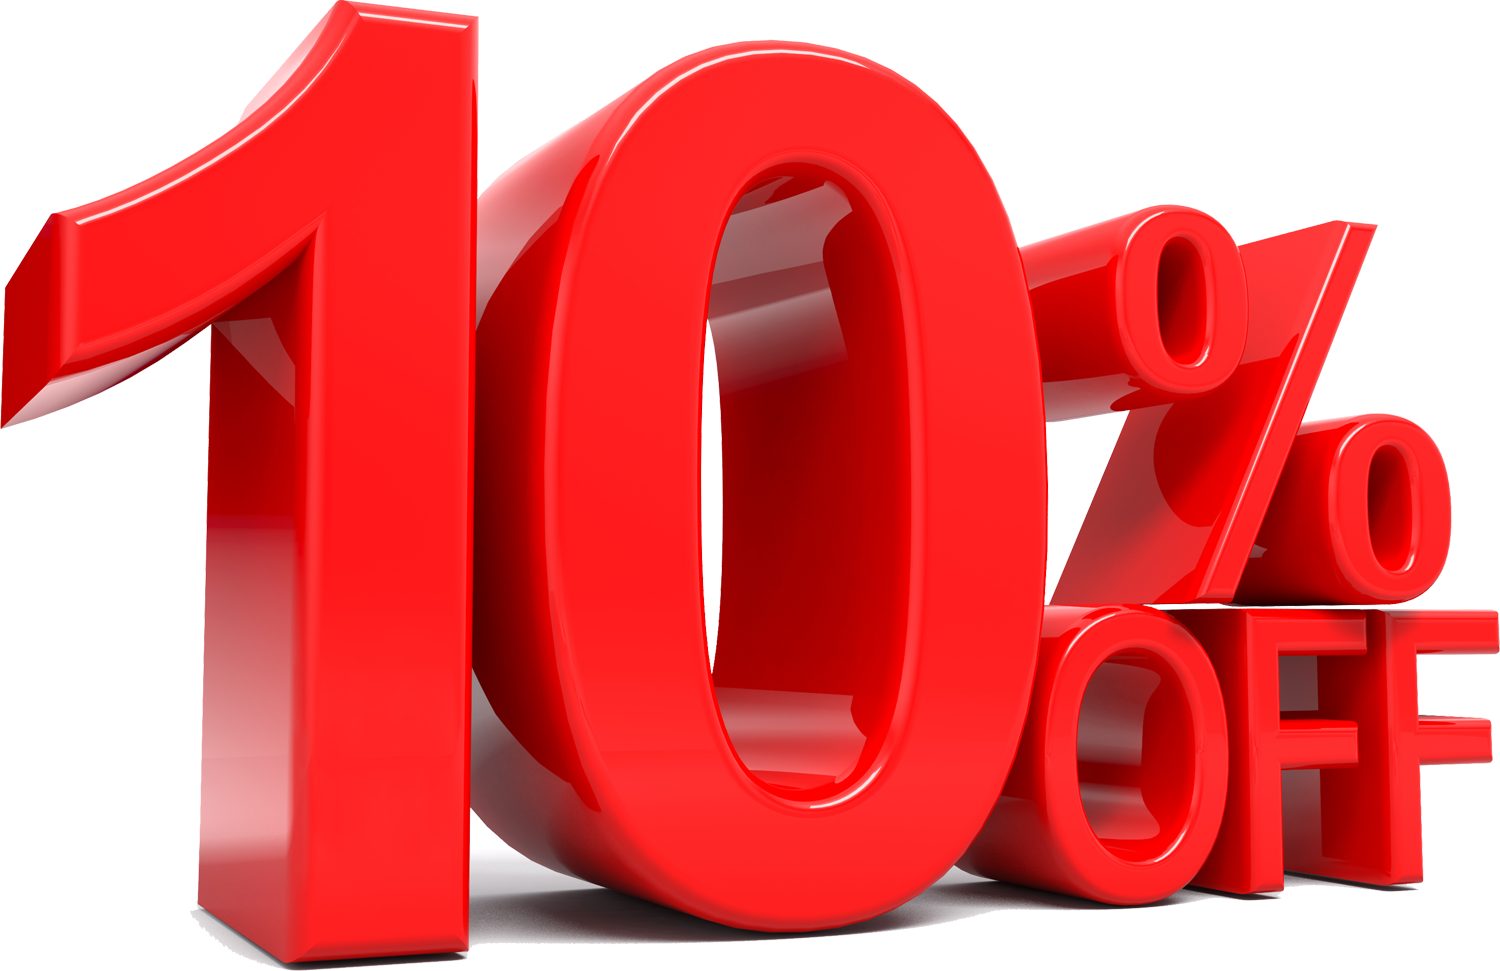 10% off PNG High-Quality Image